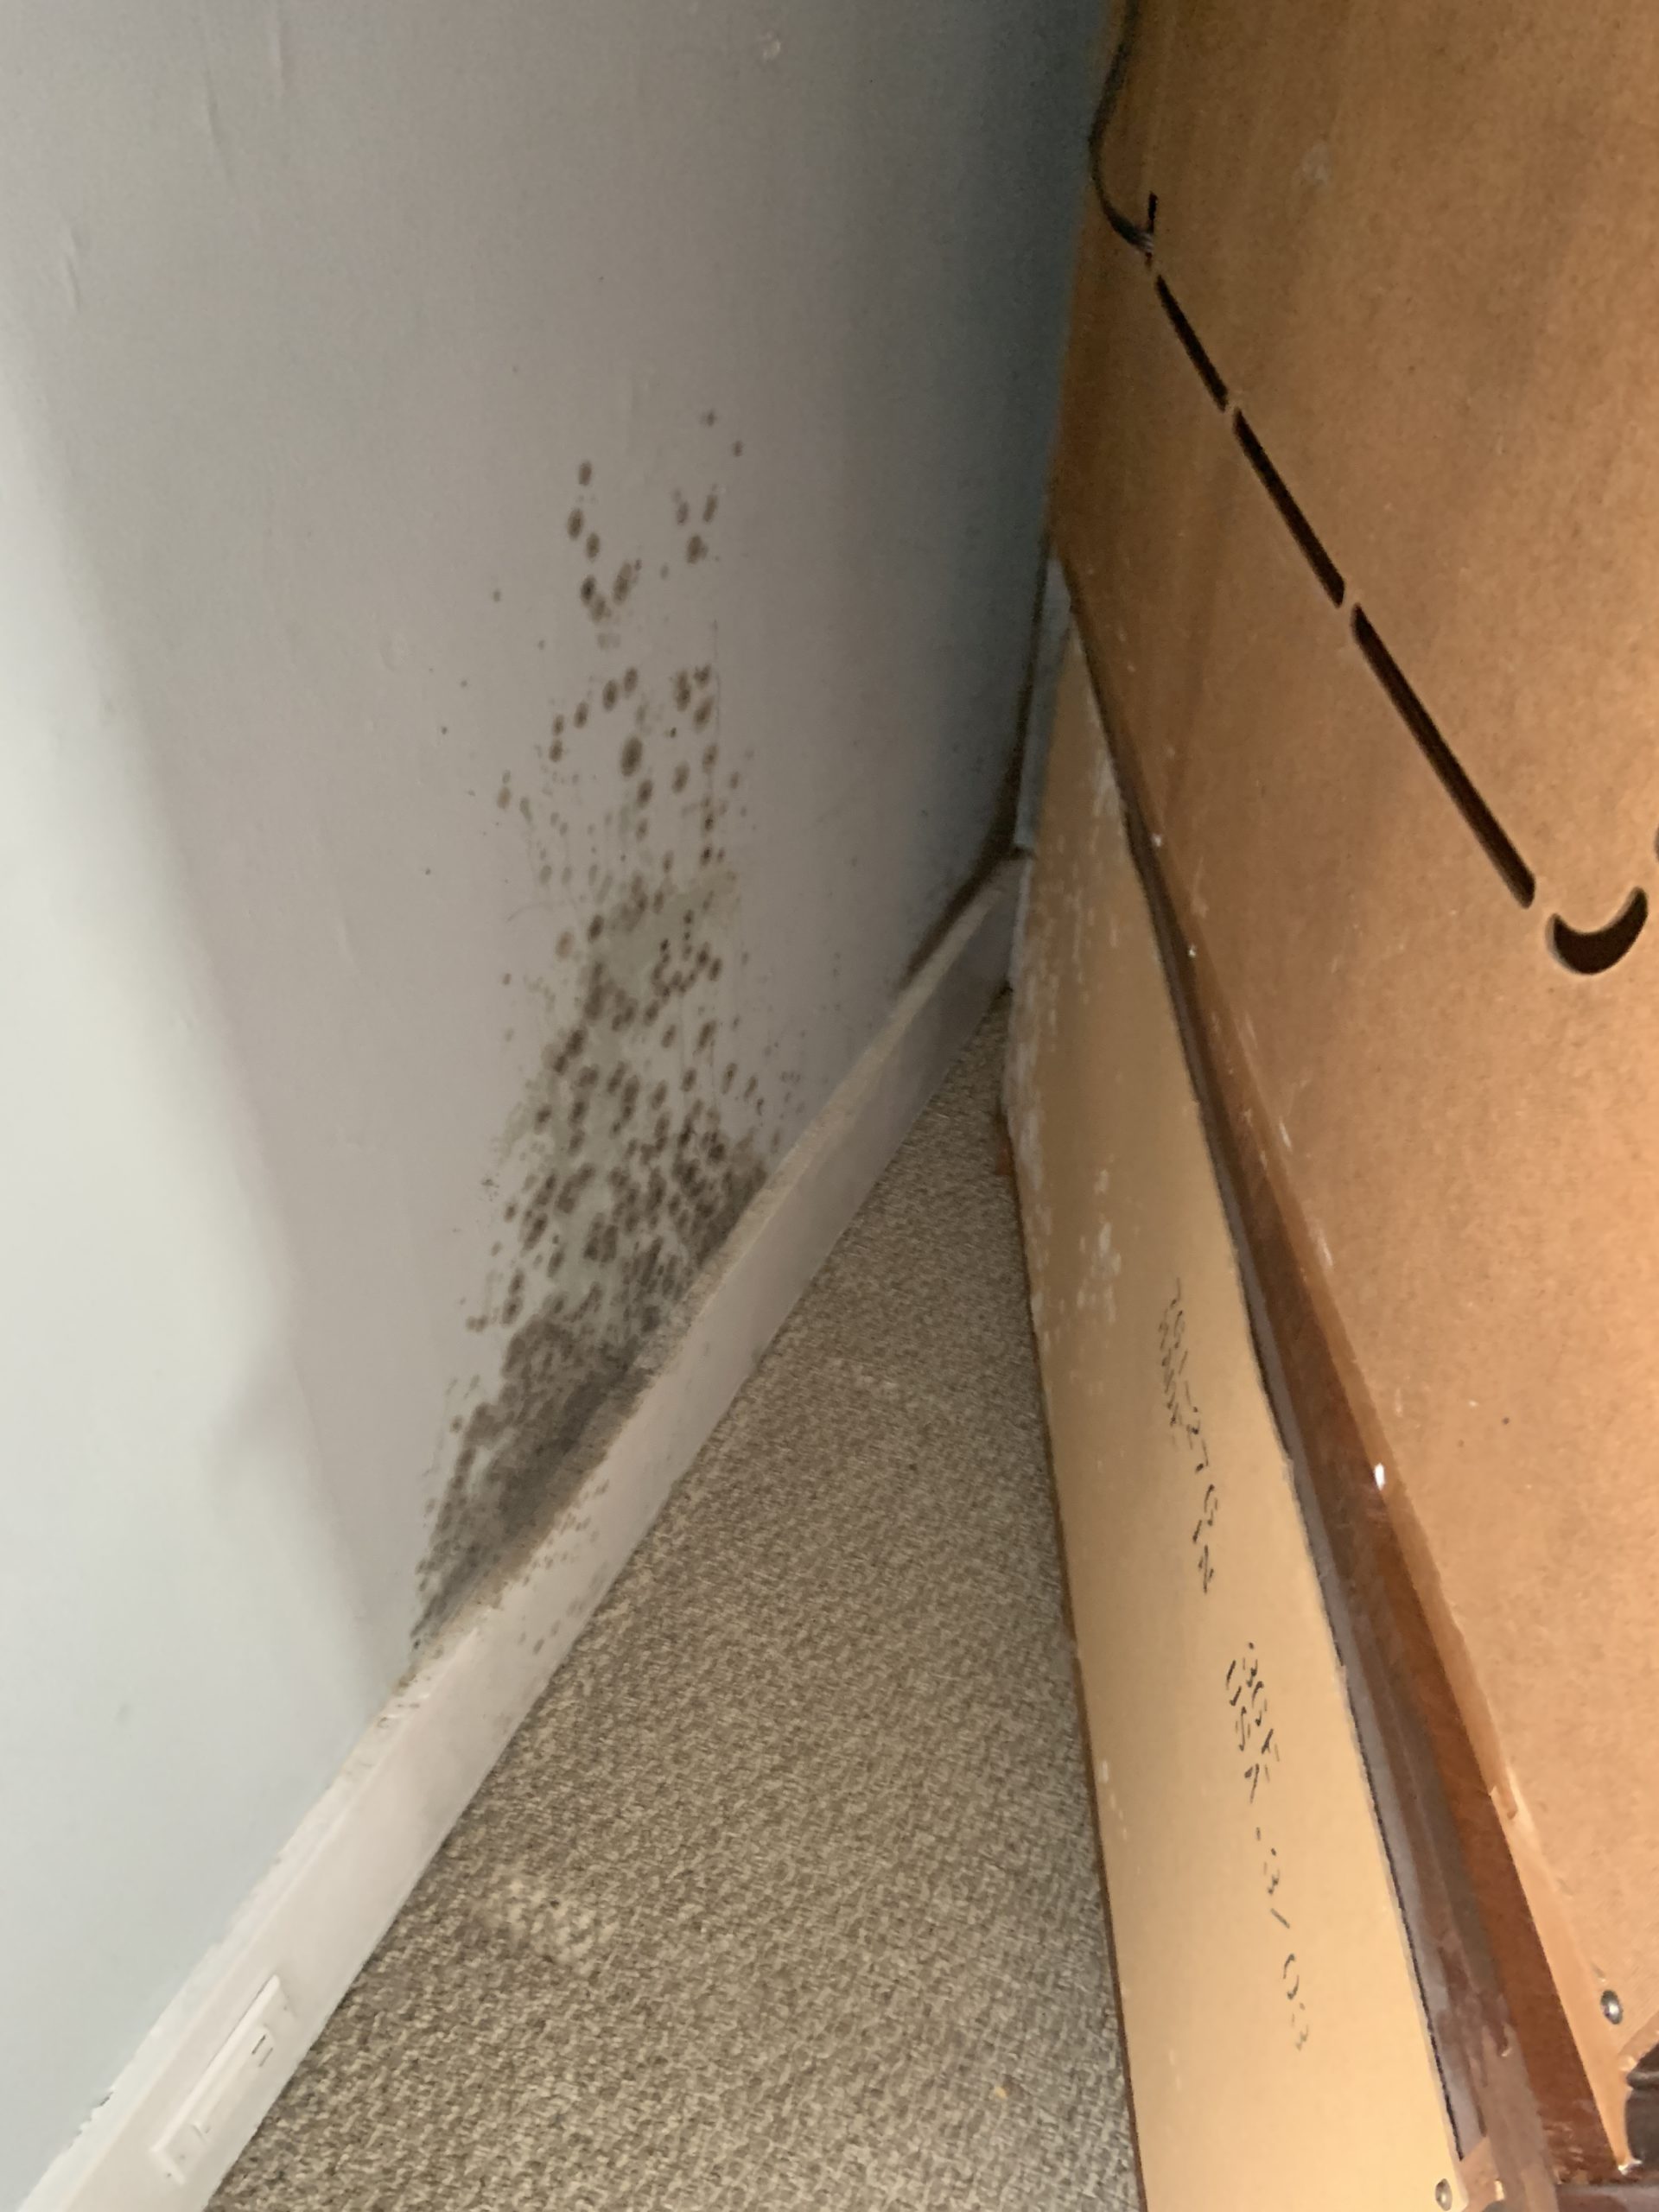 Taking proactive measures and practicing diligence can stop mold from ever becoming a problem in the home.